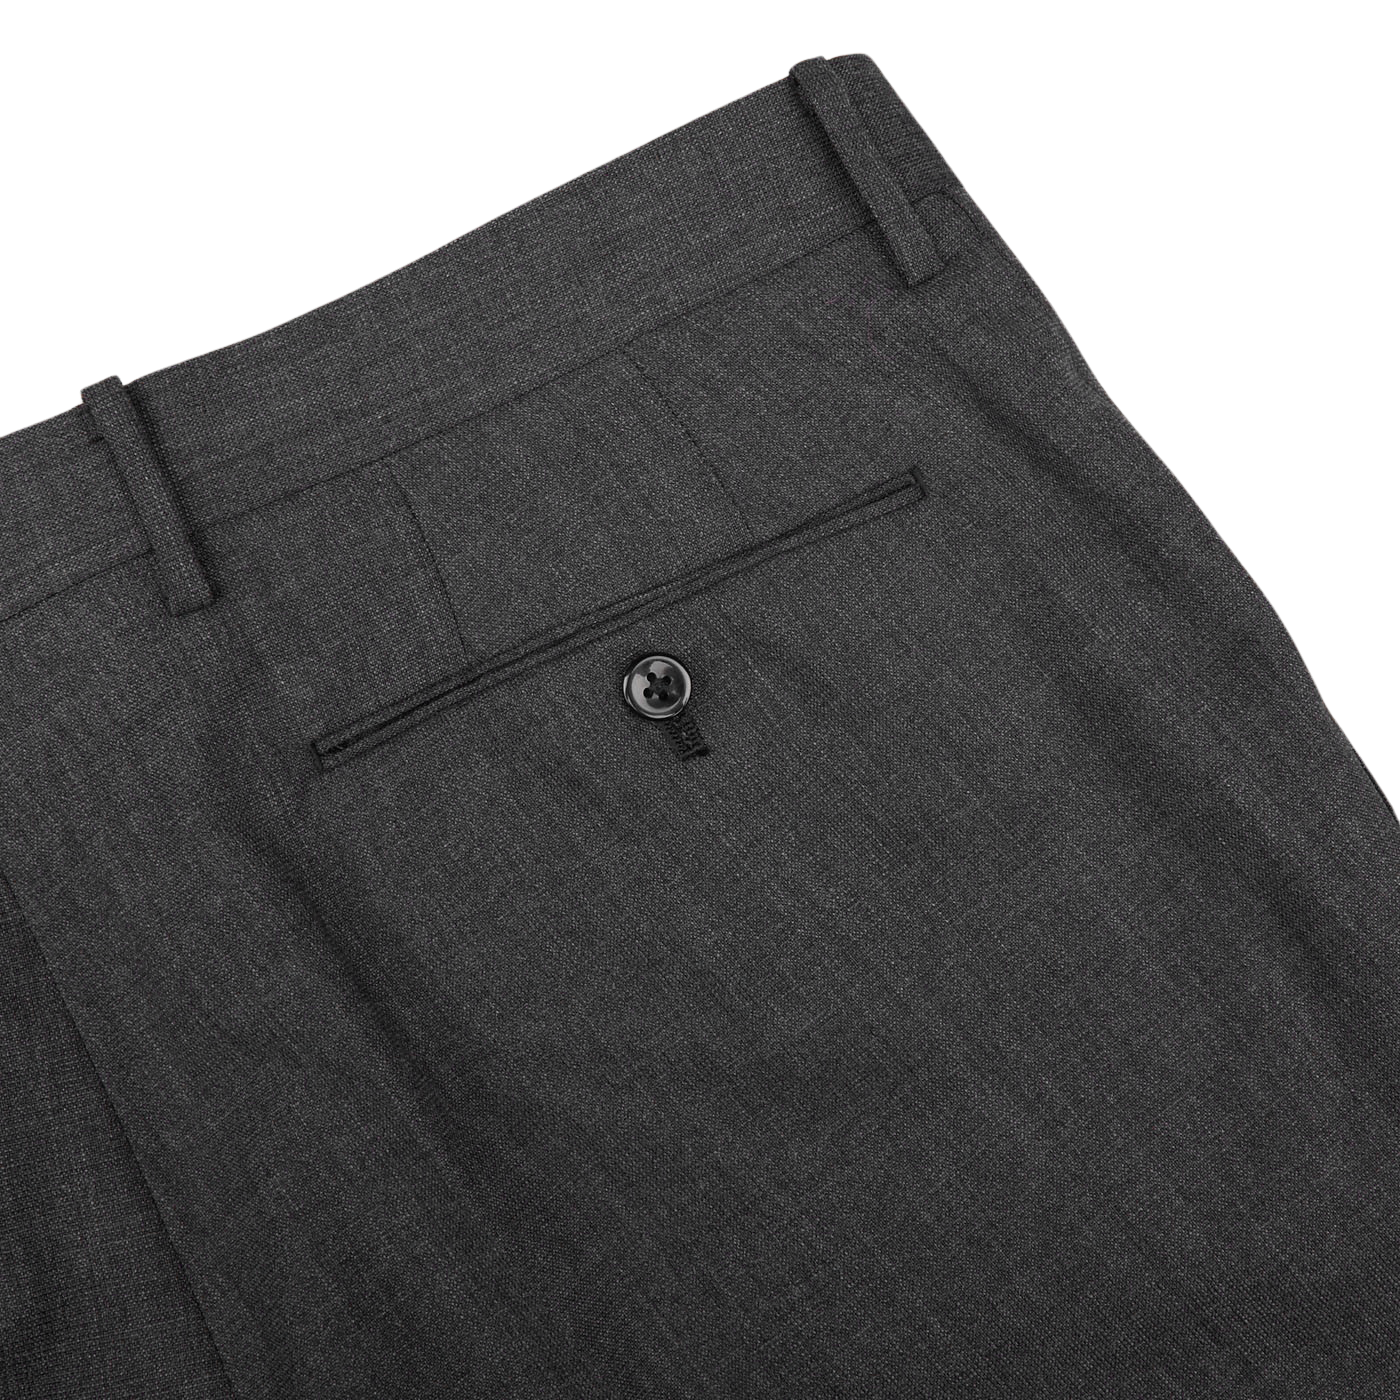 Close-up view of a Ring Jacket dark grey high twist wool suit waistband featuring belt loops and a buttoned rear pocket.